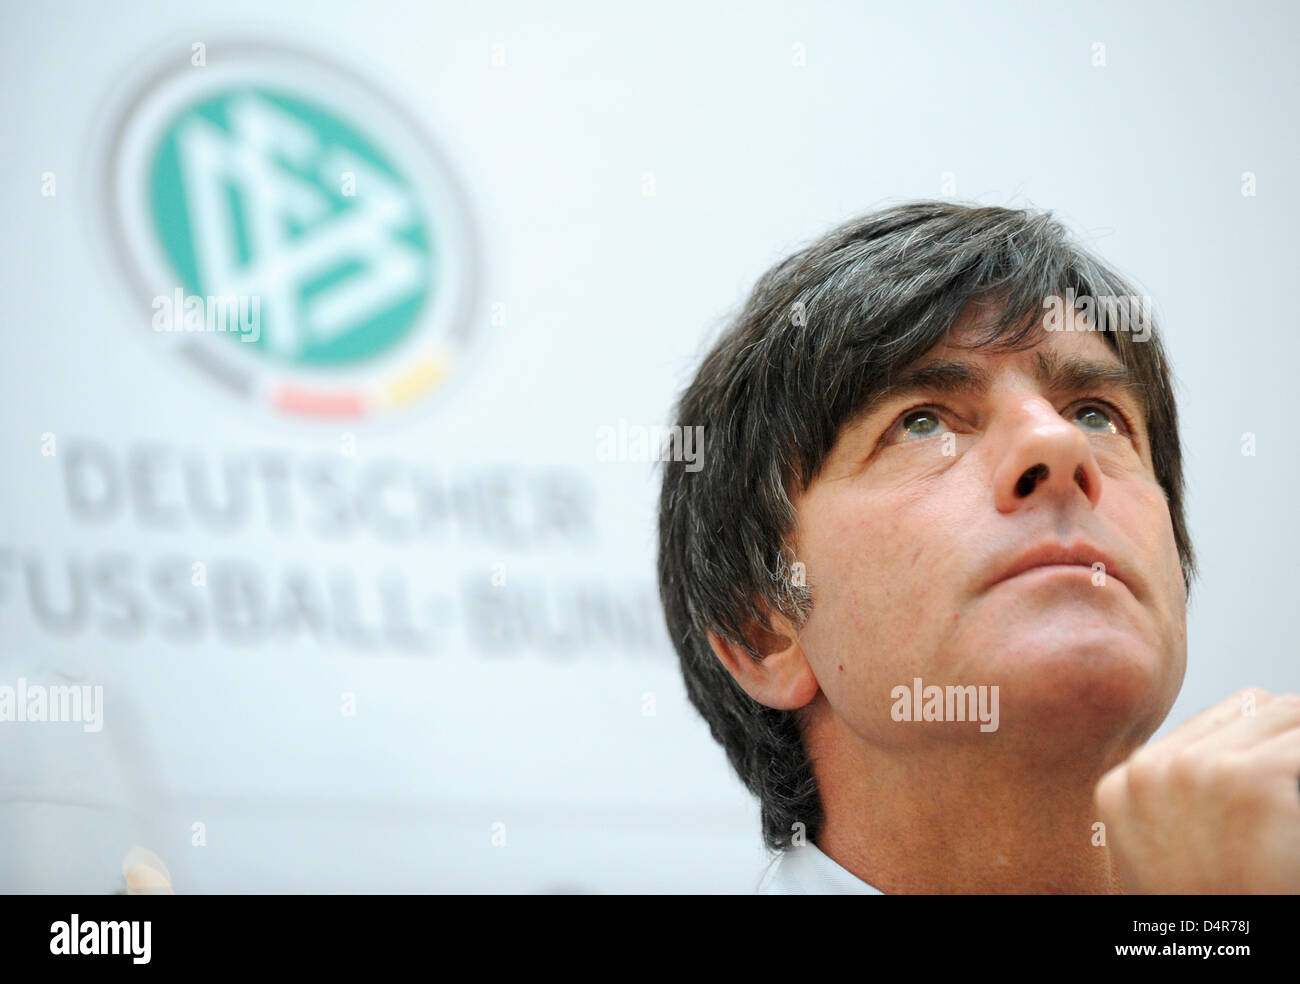 Germany head coach Joachim Loew pictured during a press conference of the German national team in Moscow, Russia, 09 October 2009. The German team faces Russia?s squad for a crucial FIFA 2010 World Cup qualifier on 10 October to be held on artificial turf at Luzhniki stadium of Moscow. Phhoto: Marcus Brandt Stock Photo